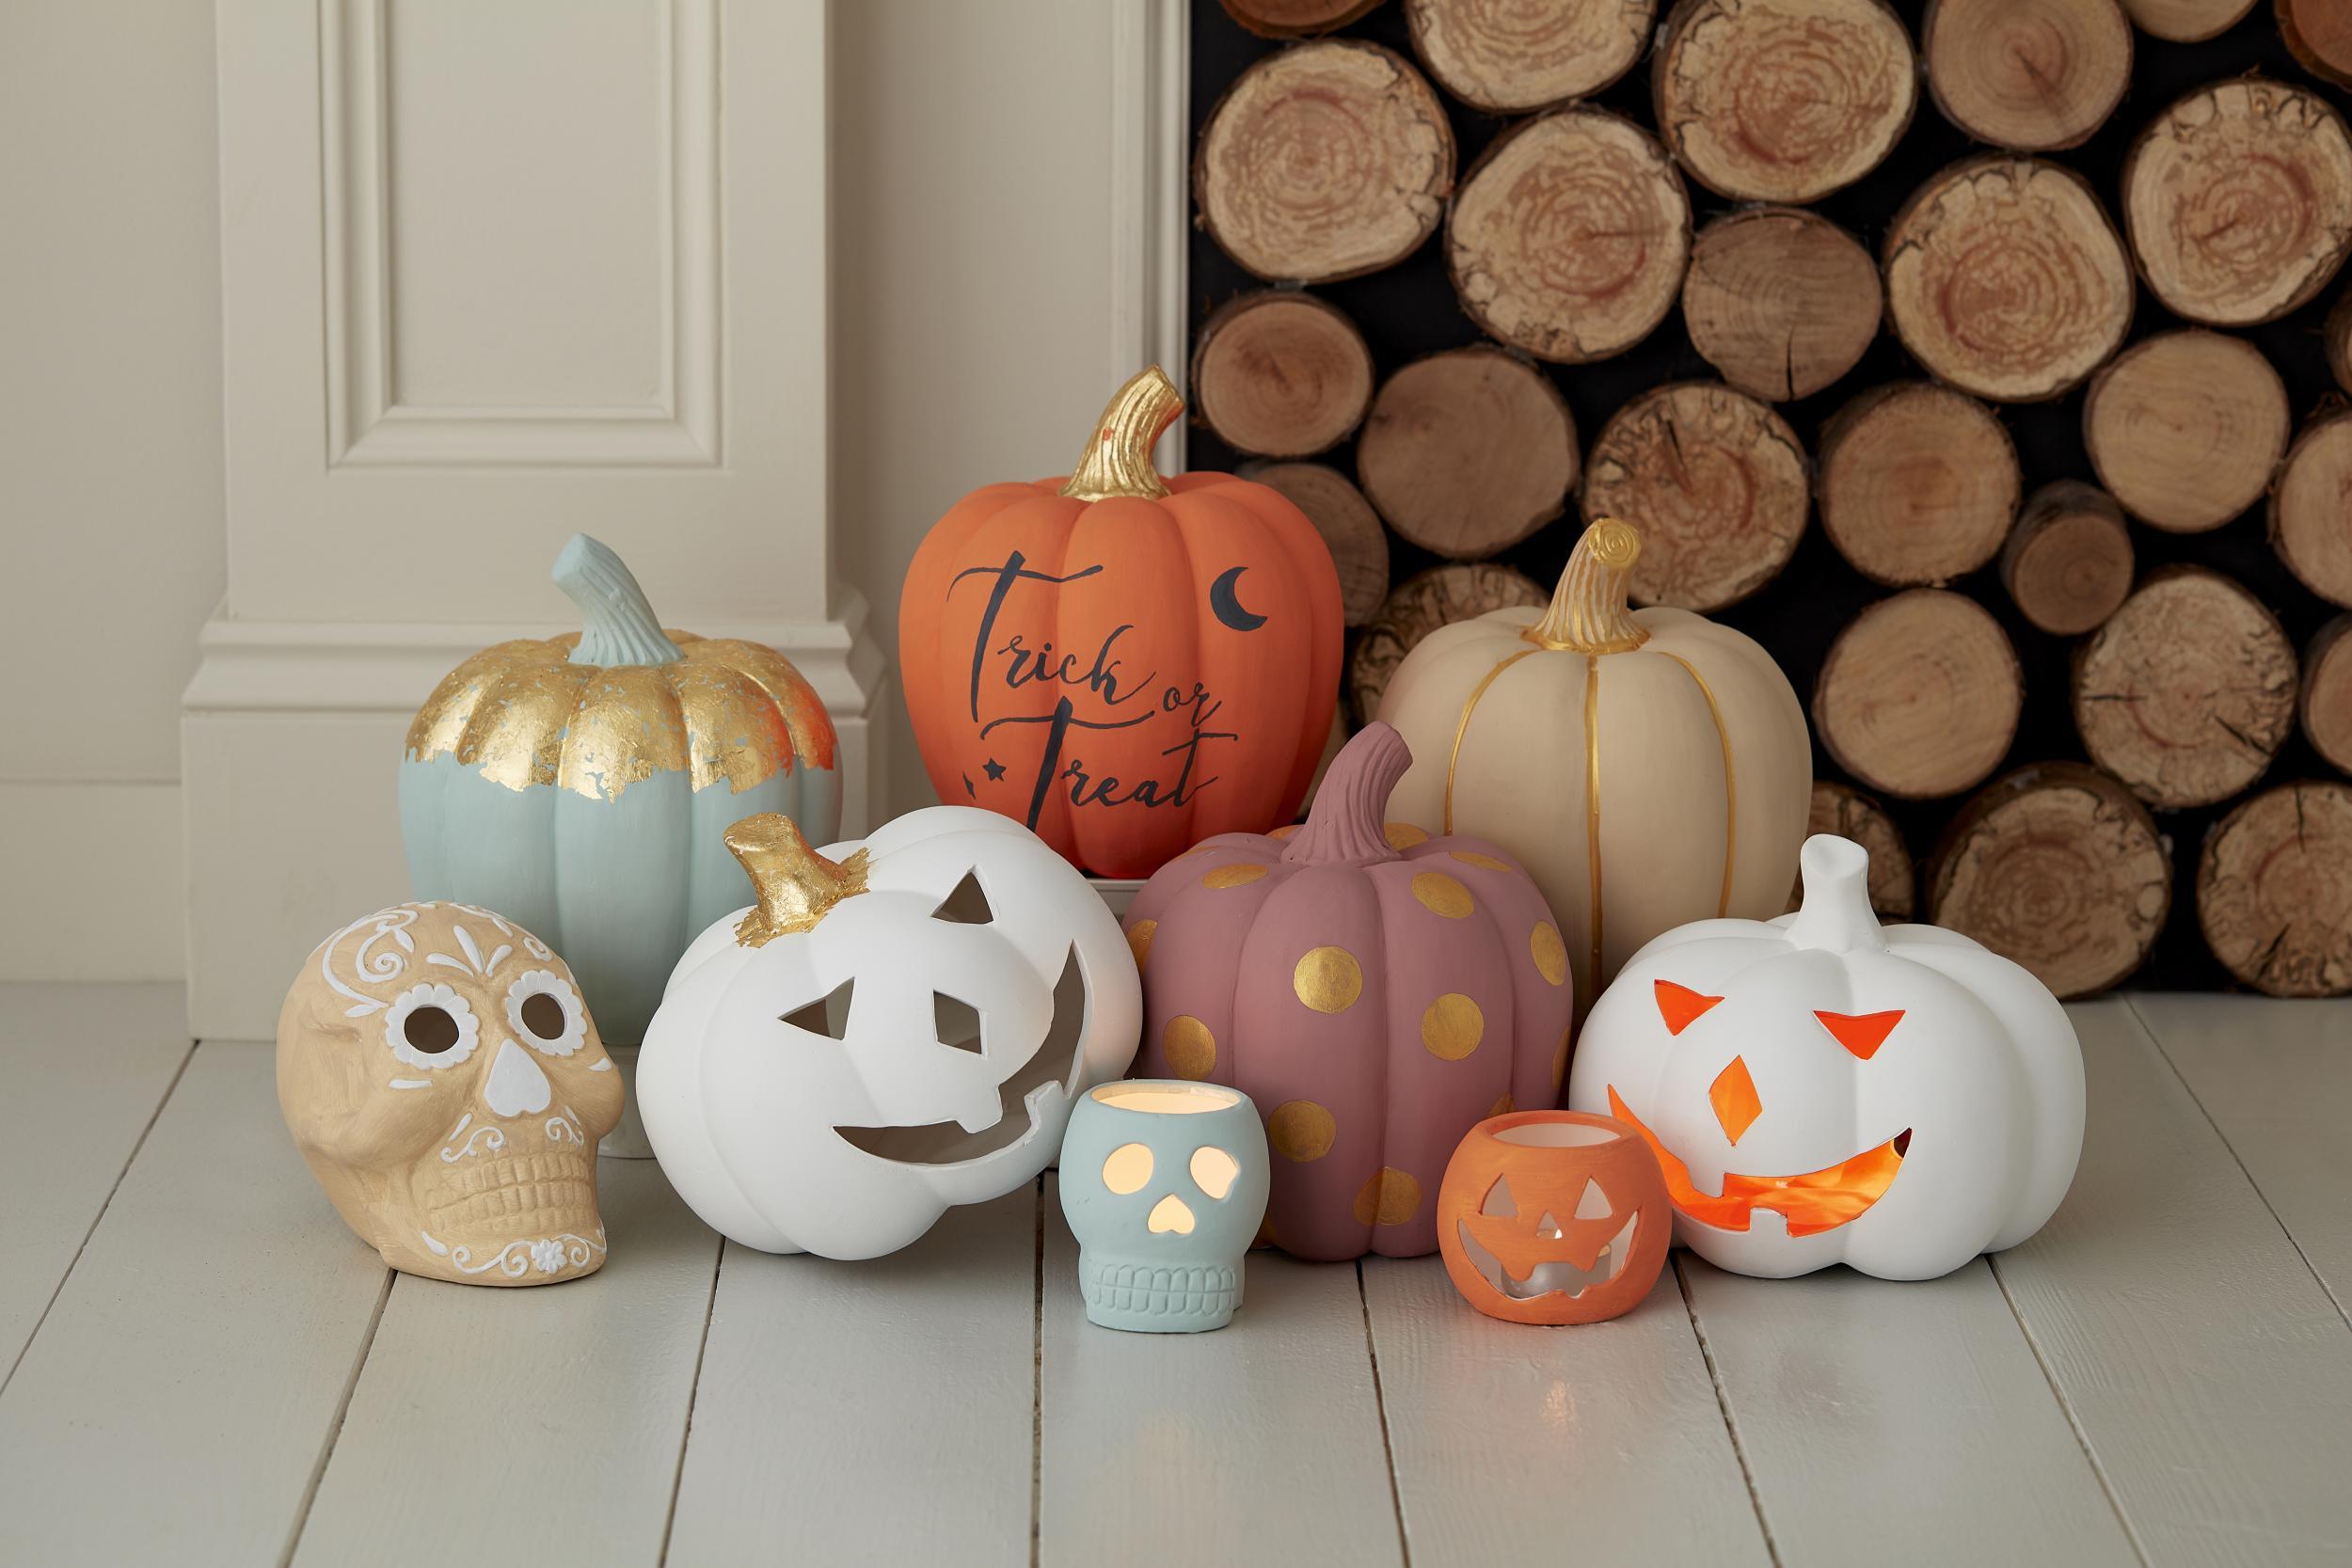 Where To Buy Affordable Halloween Decorations The Independent